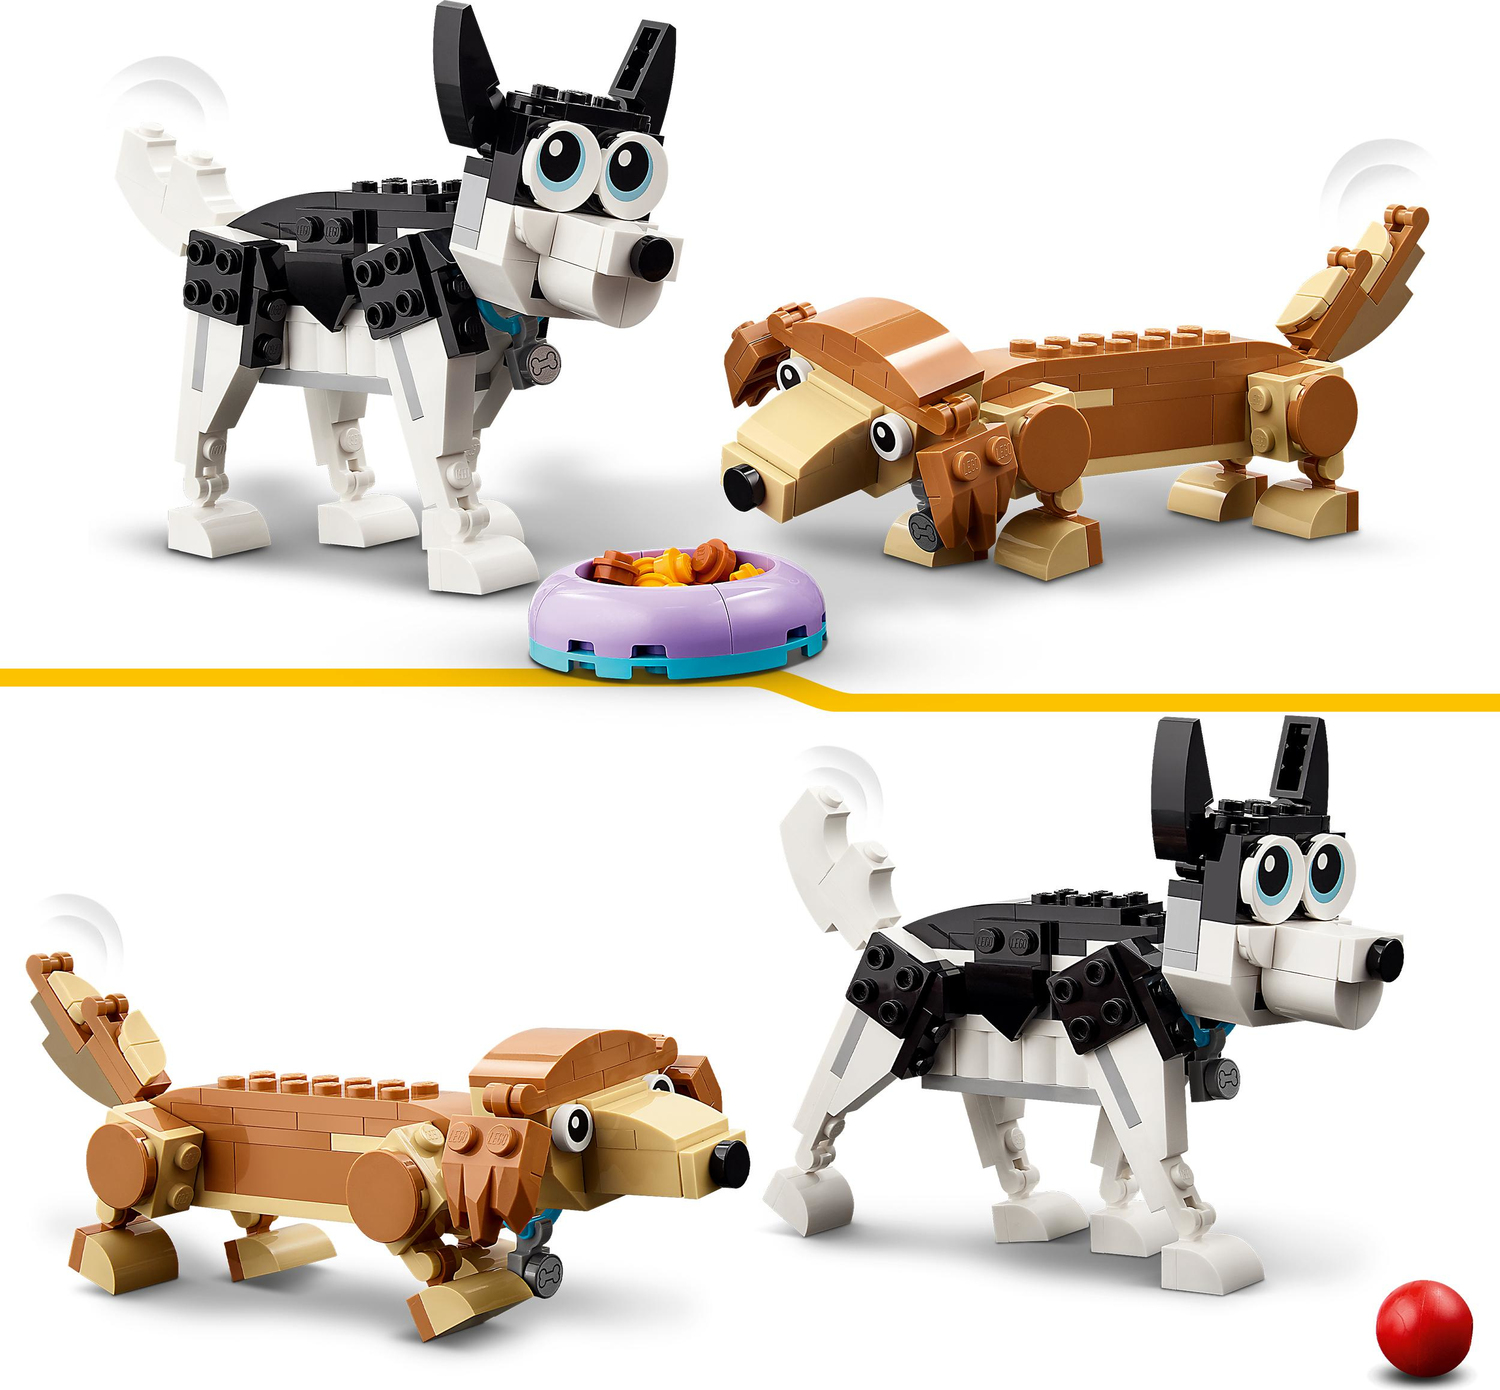 LEGO Creator 3-in-1 31137 Adorable Dogs